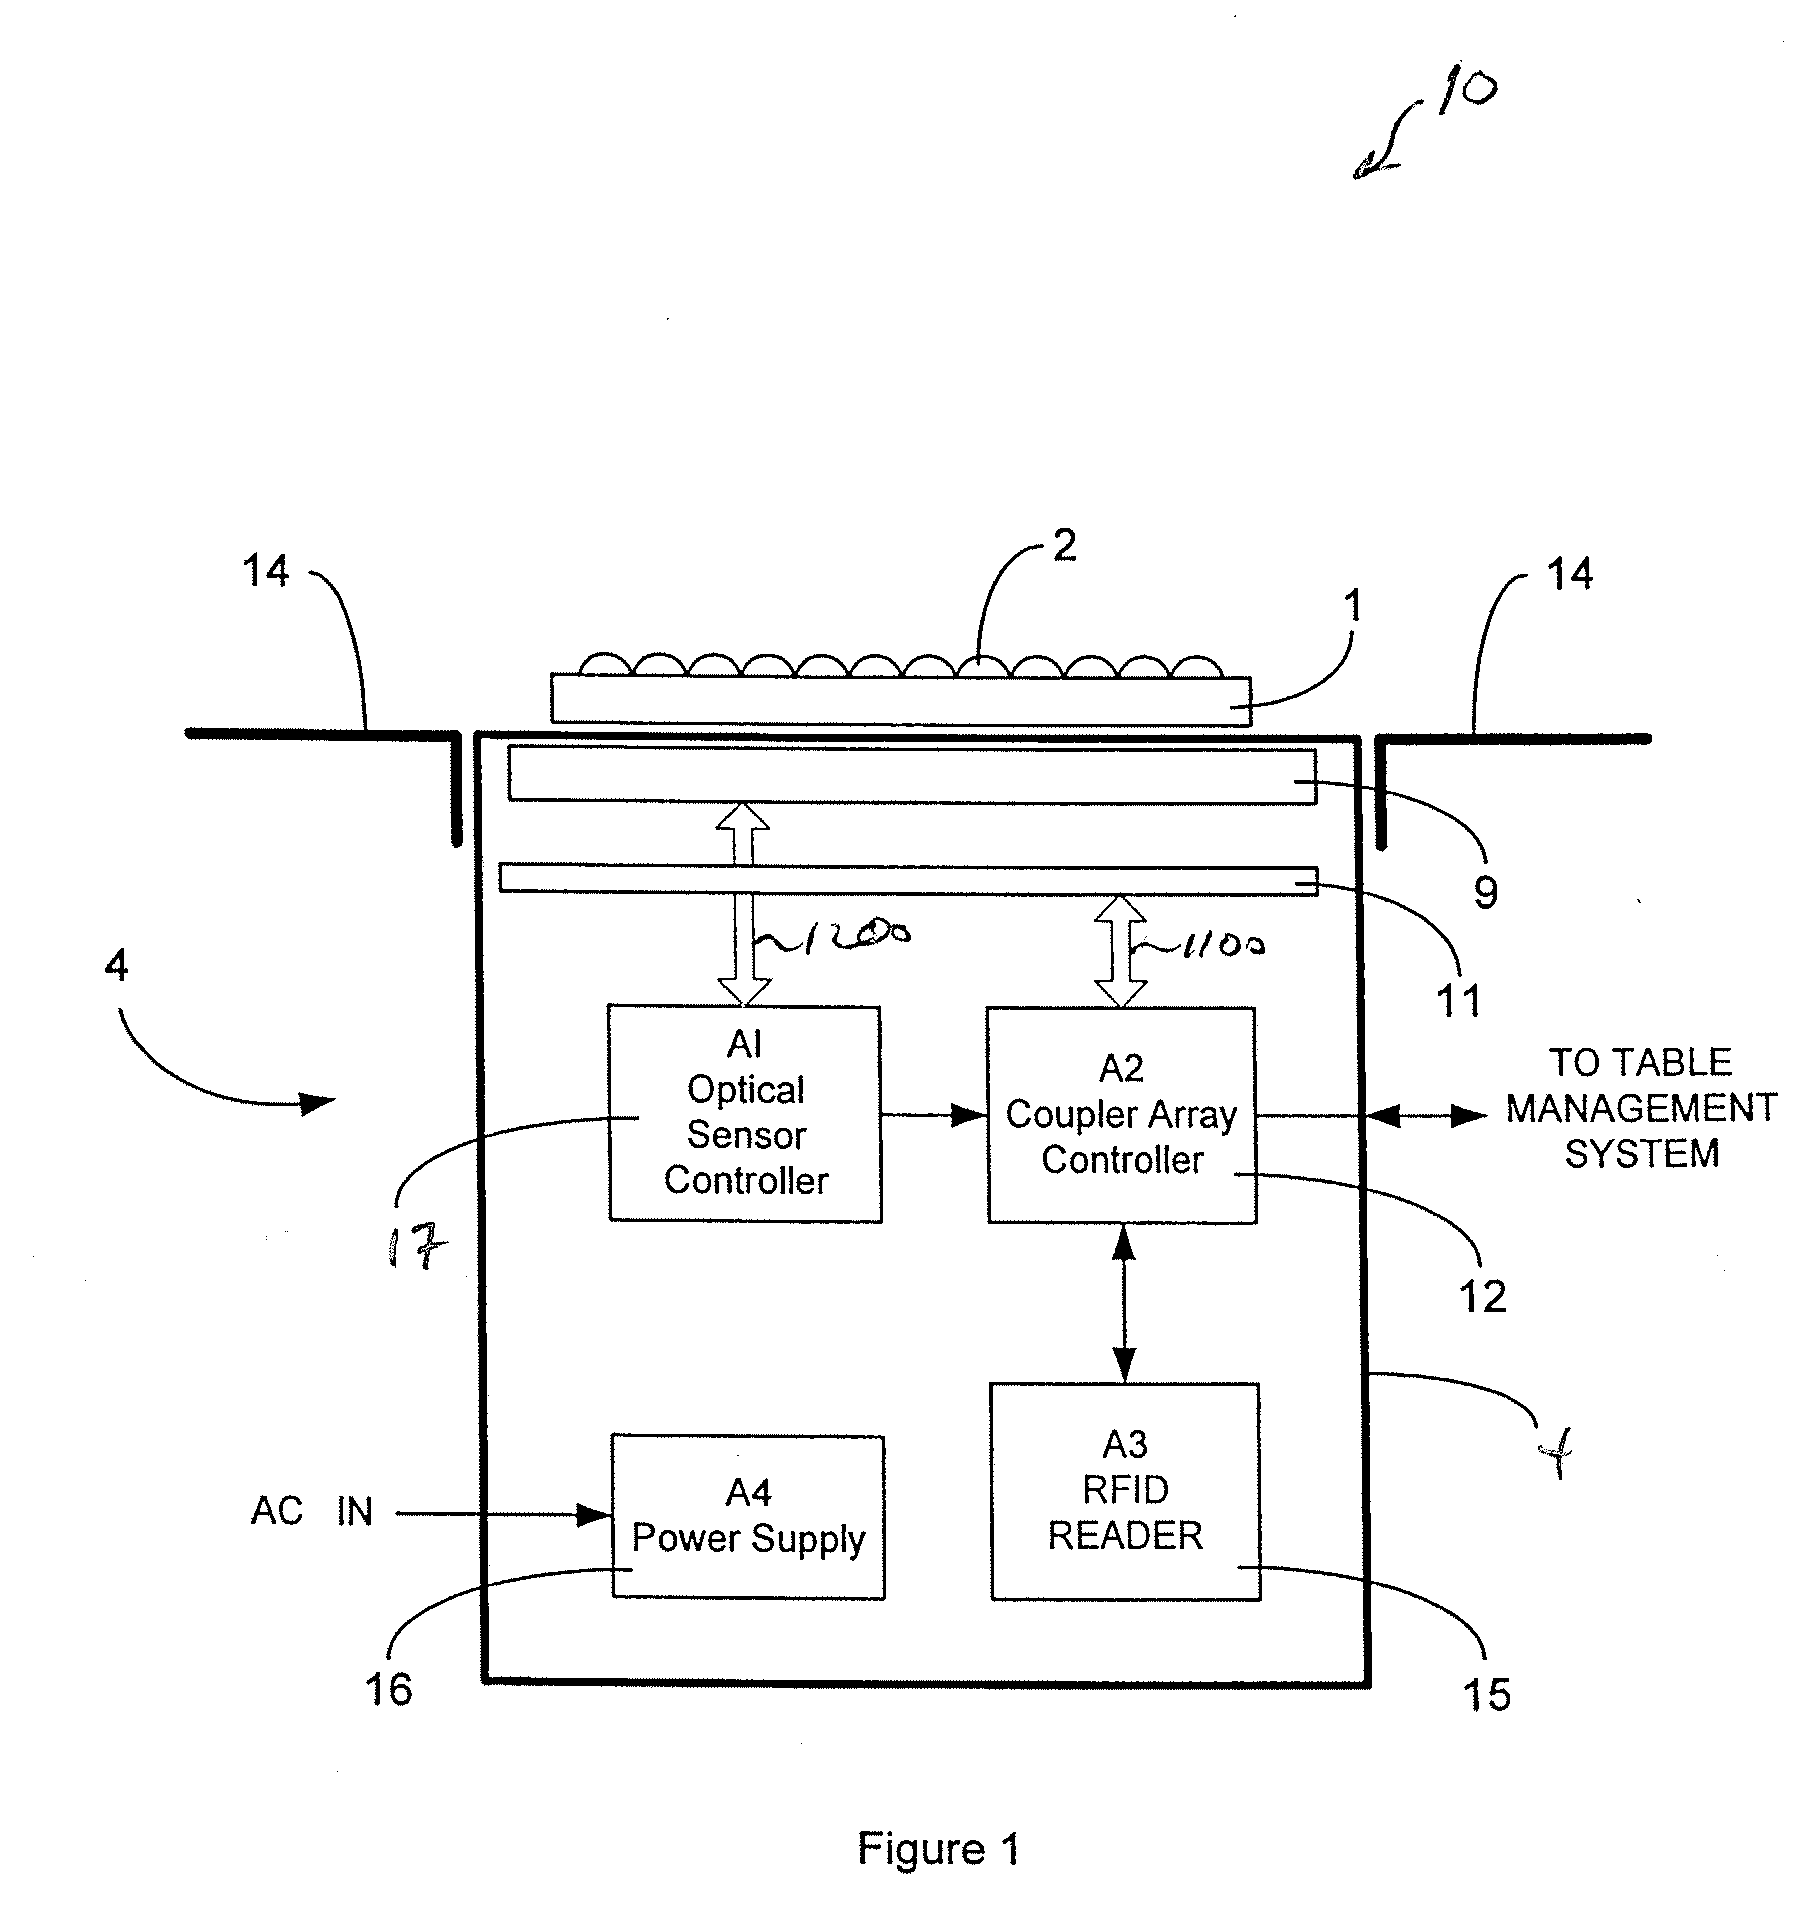 Multi-Sensor System for Counting and Identifying Objects in Close Proximity